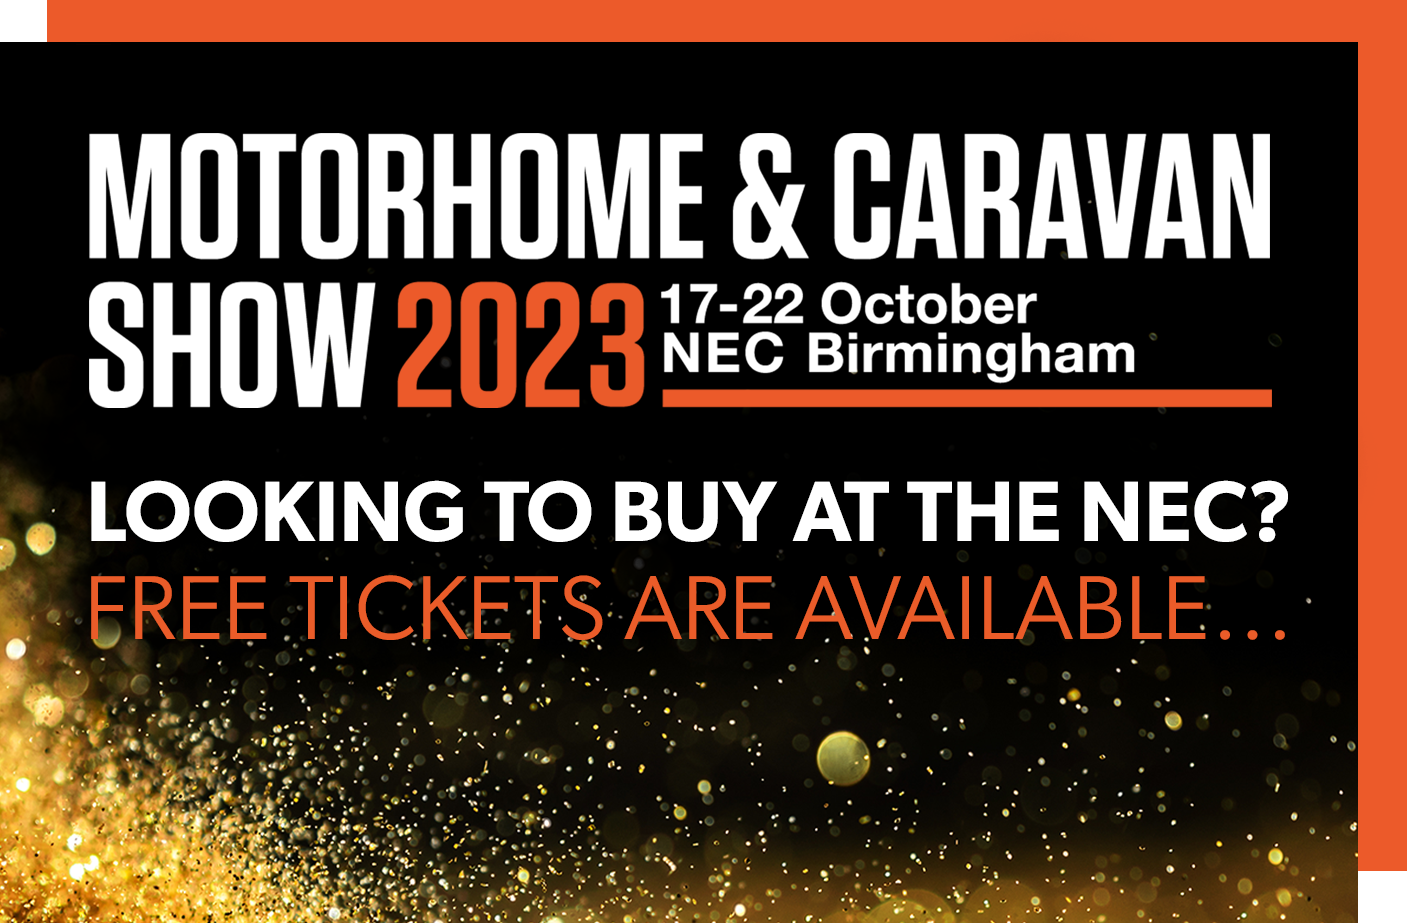 Register for FREE tickets at this years NEC Motorhome & Caravan Show!